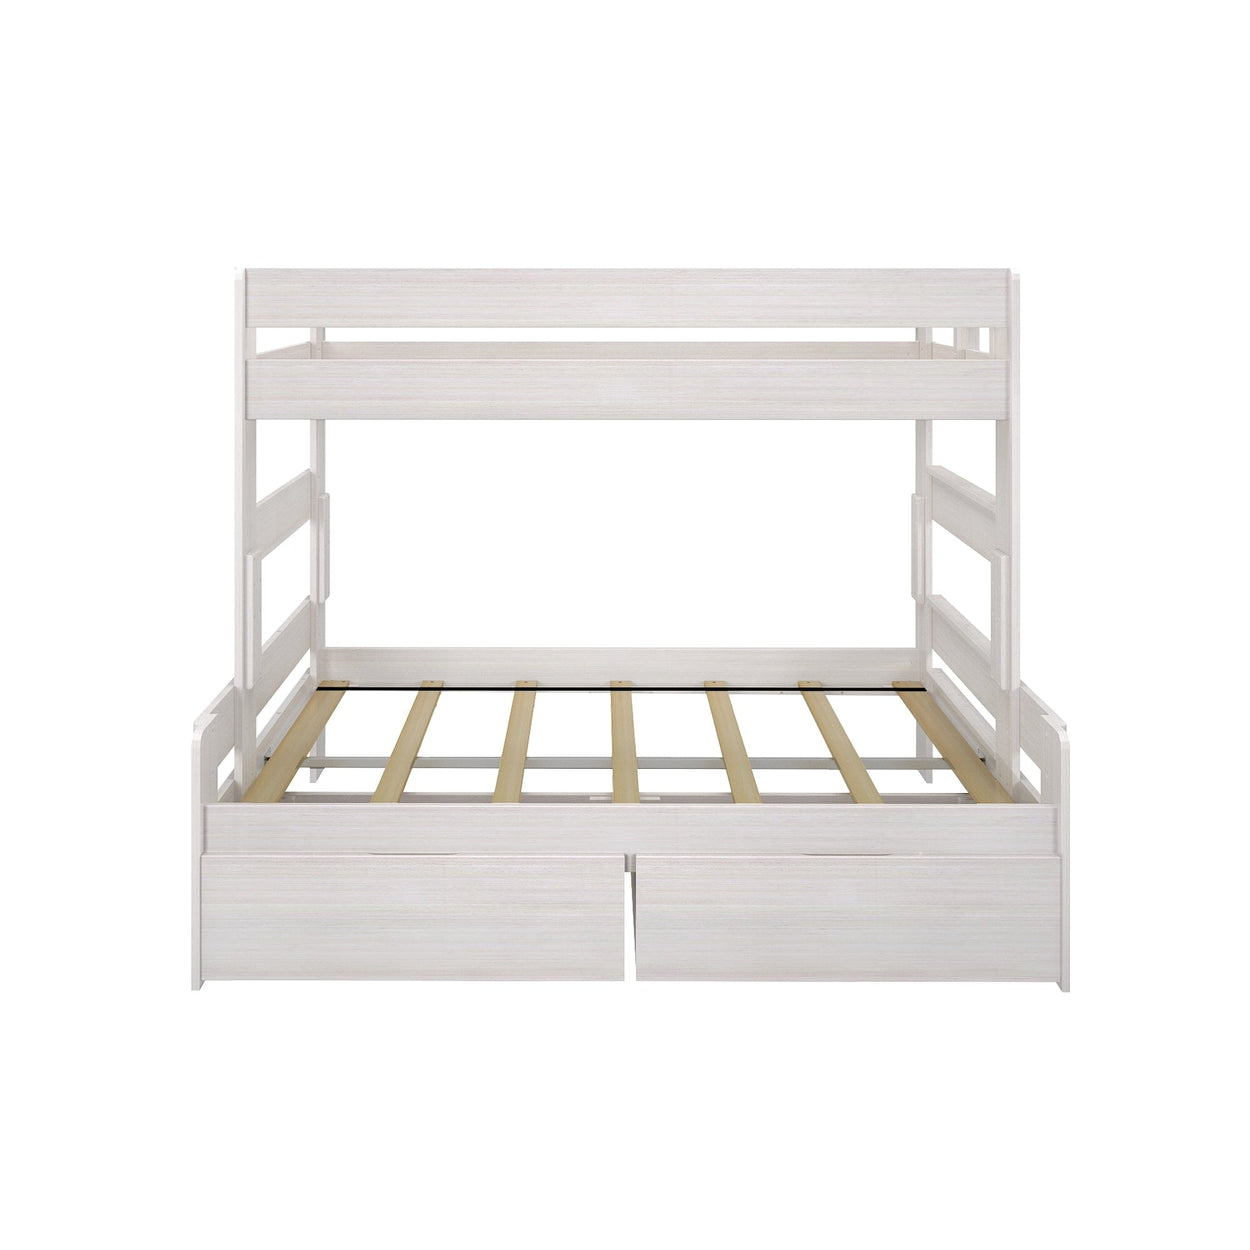 197231-182 : Bunk Beds Farmhouse Twin over Full Bunk Bed with Storage Drawers, White Wash